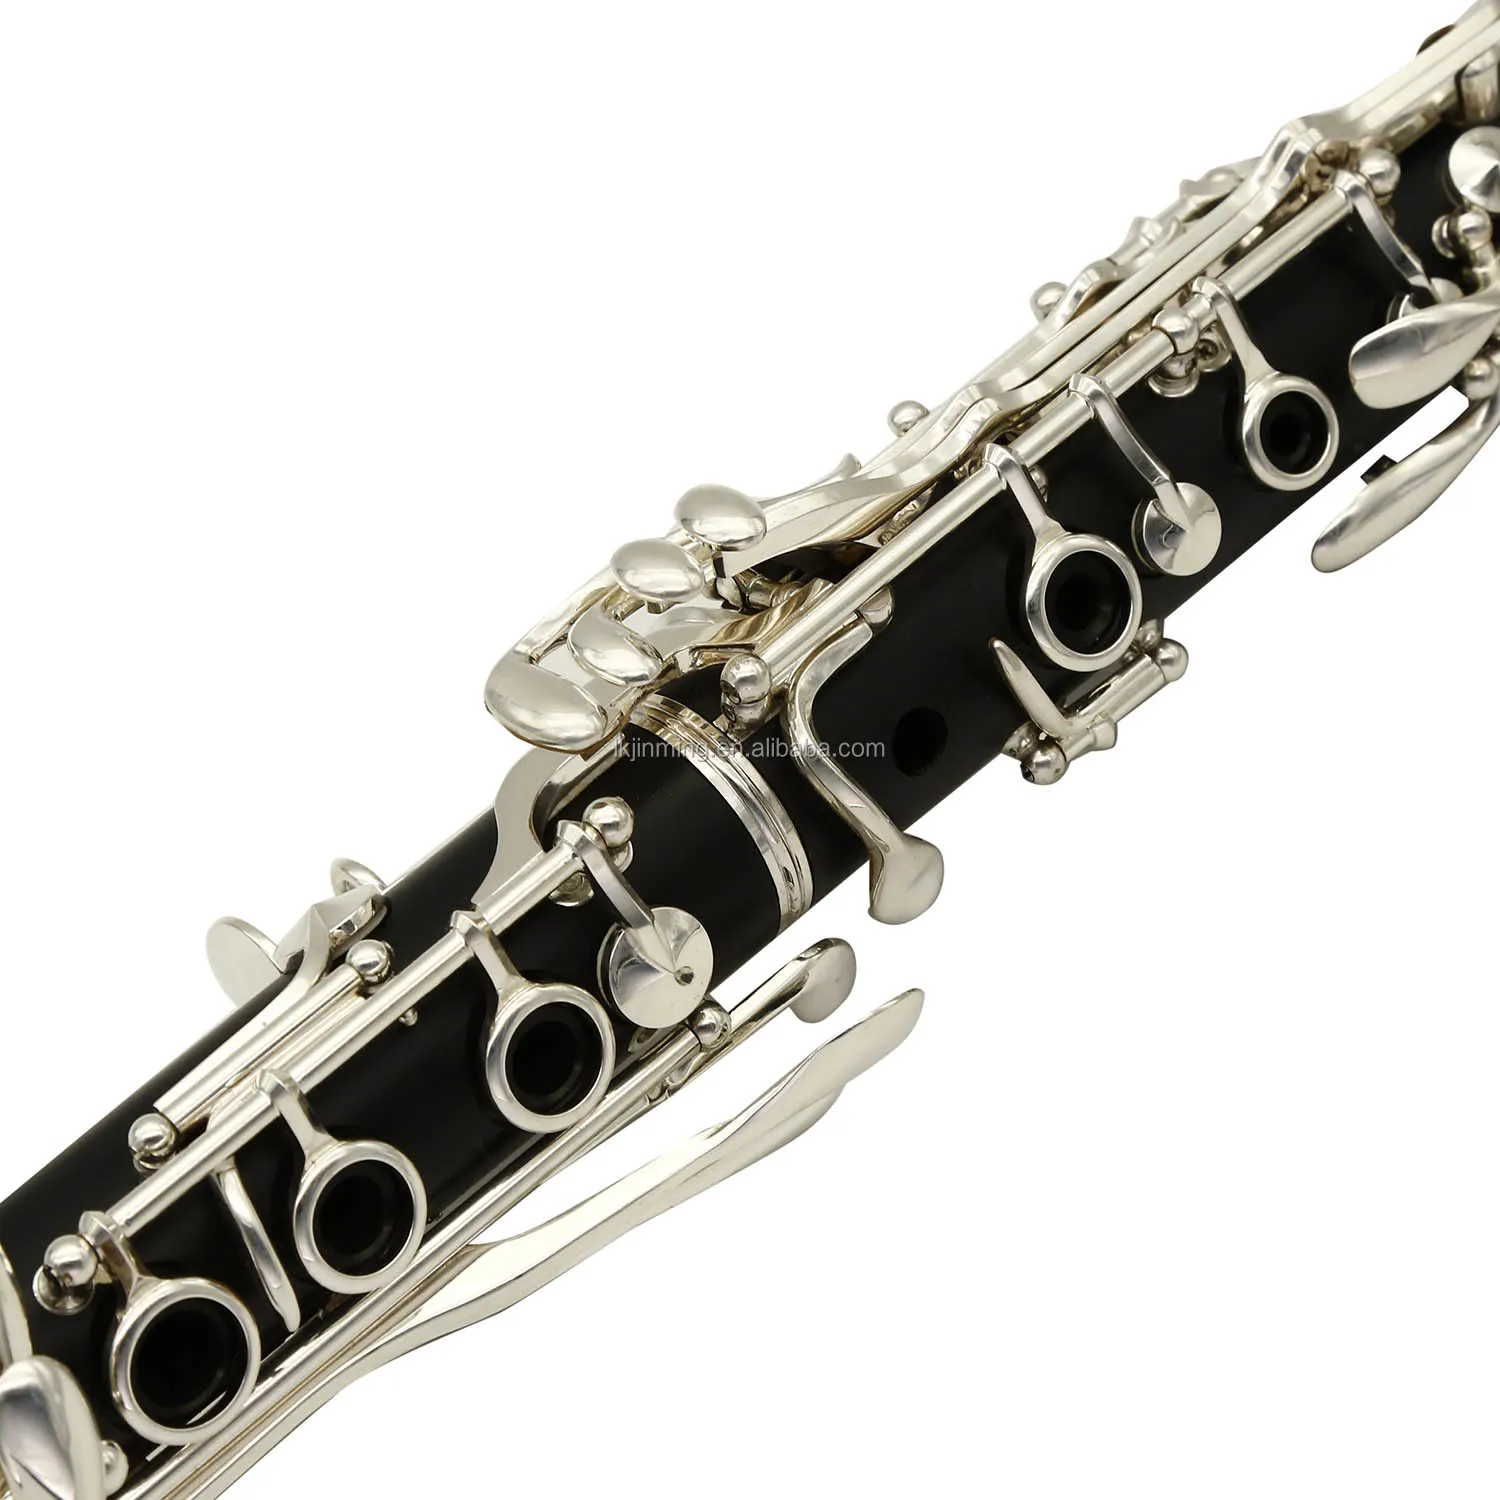 Quality Selection 17-key ABS Clarinet For Large-scale Performance